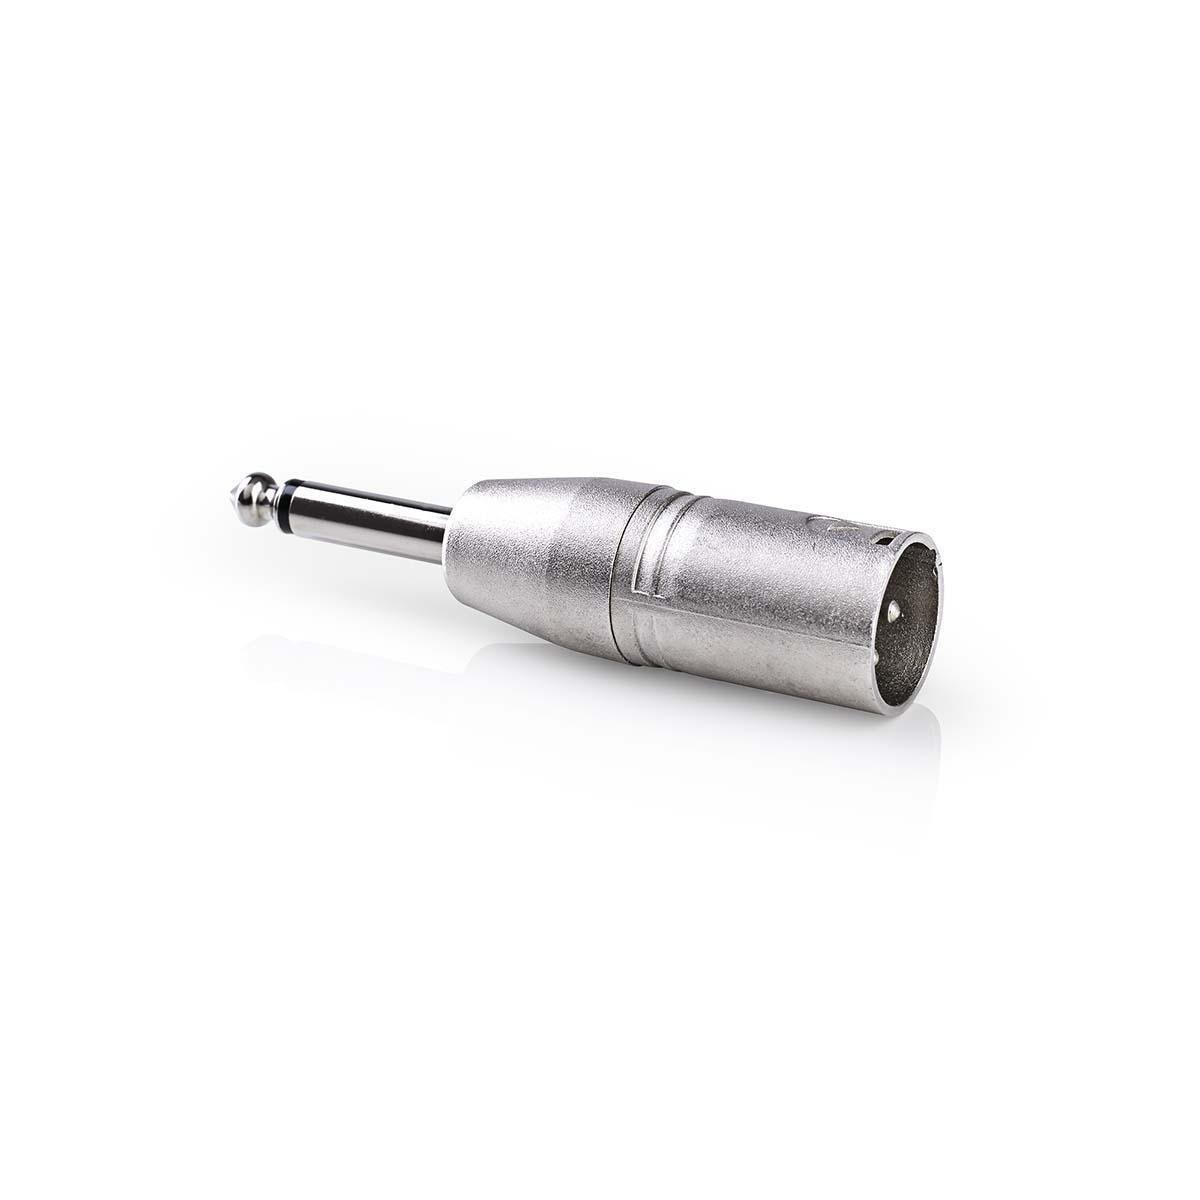 XLR 3-PIN MALE TO 6.35mm ADAPTER